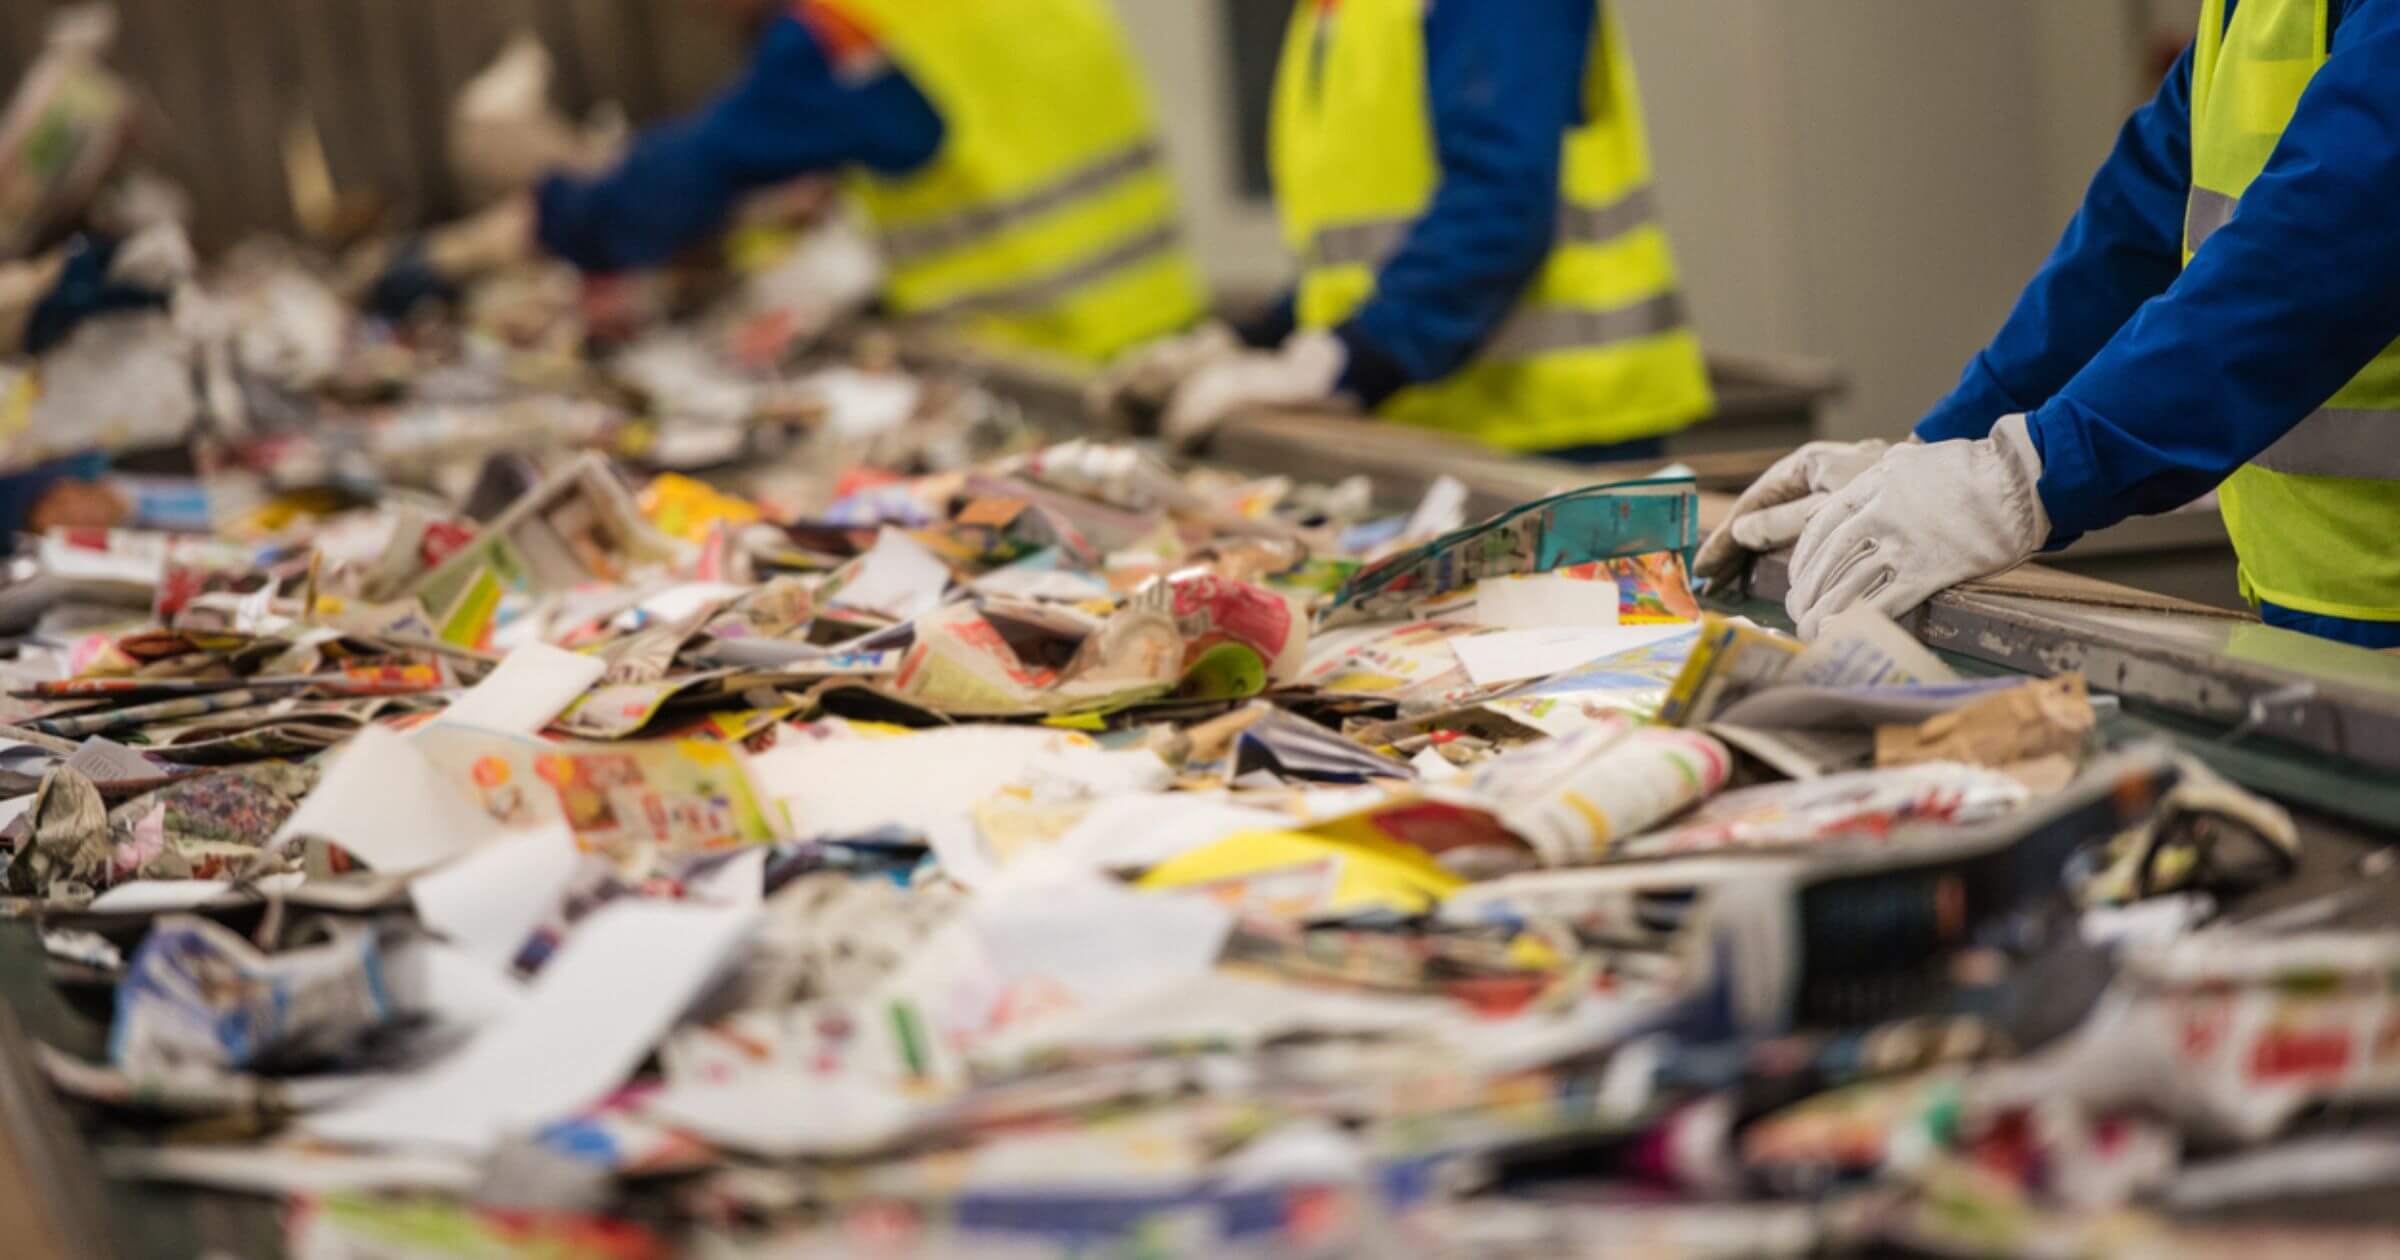 Lots of paper and cardboard laid out on a conveyer belt with people in high viz jackets sorting it